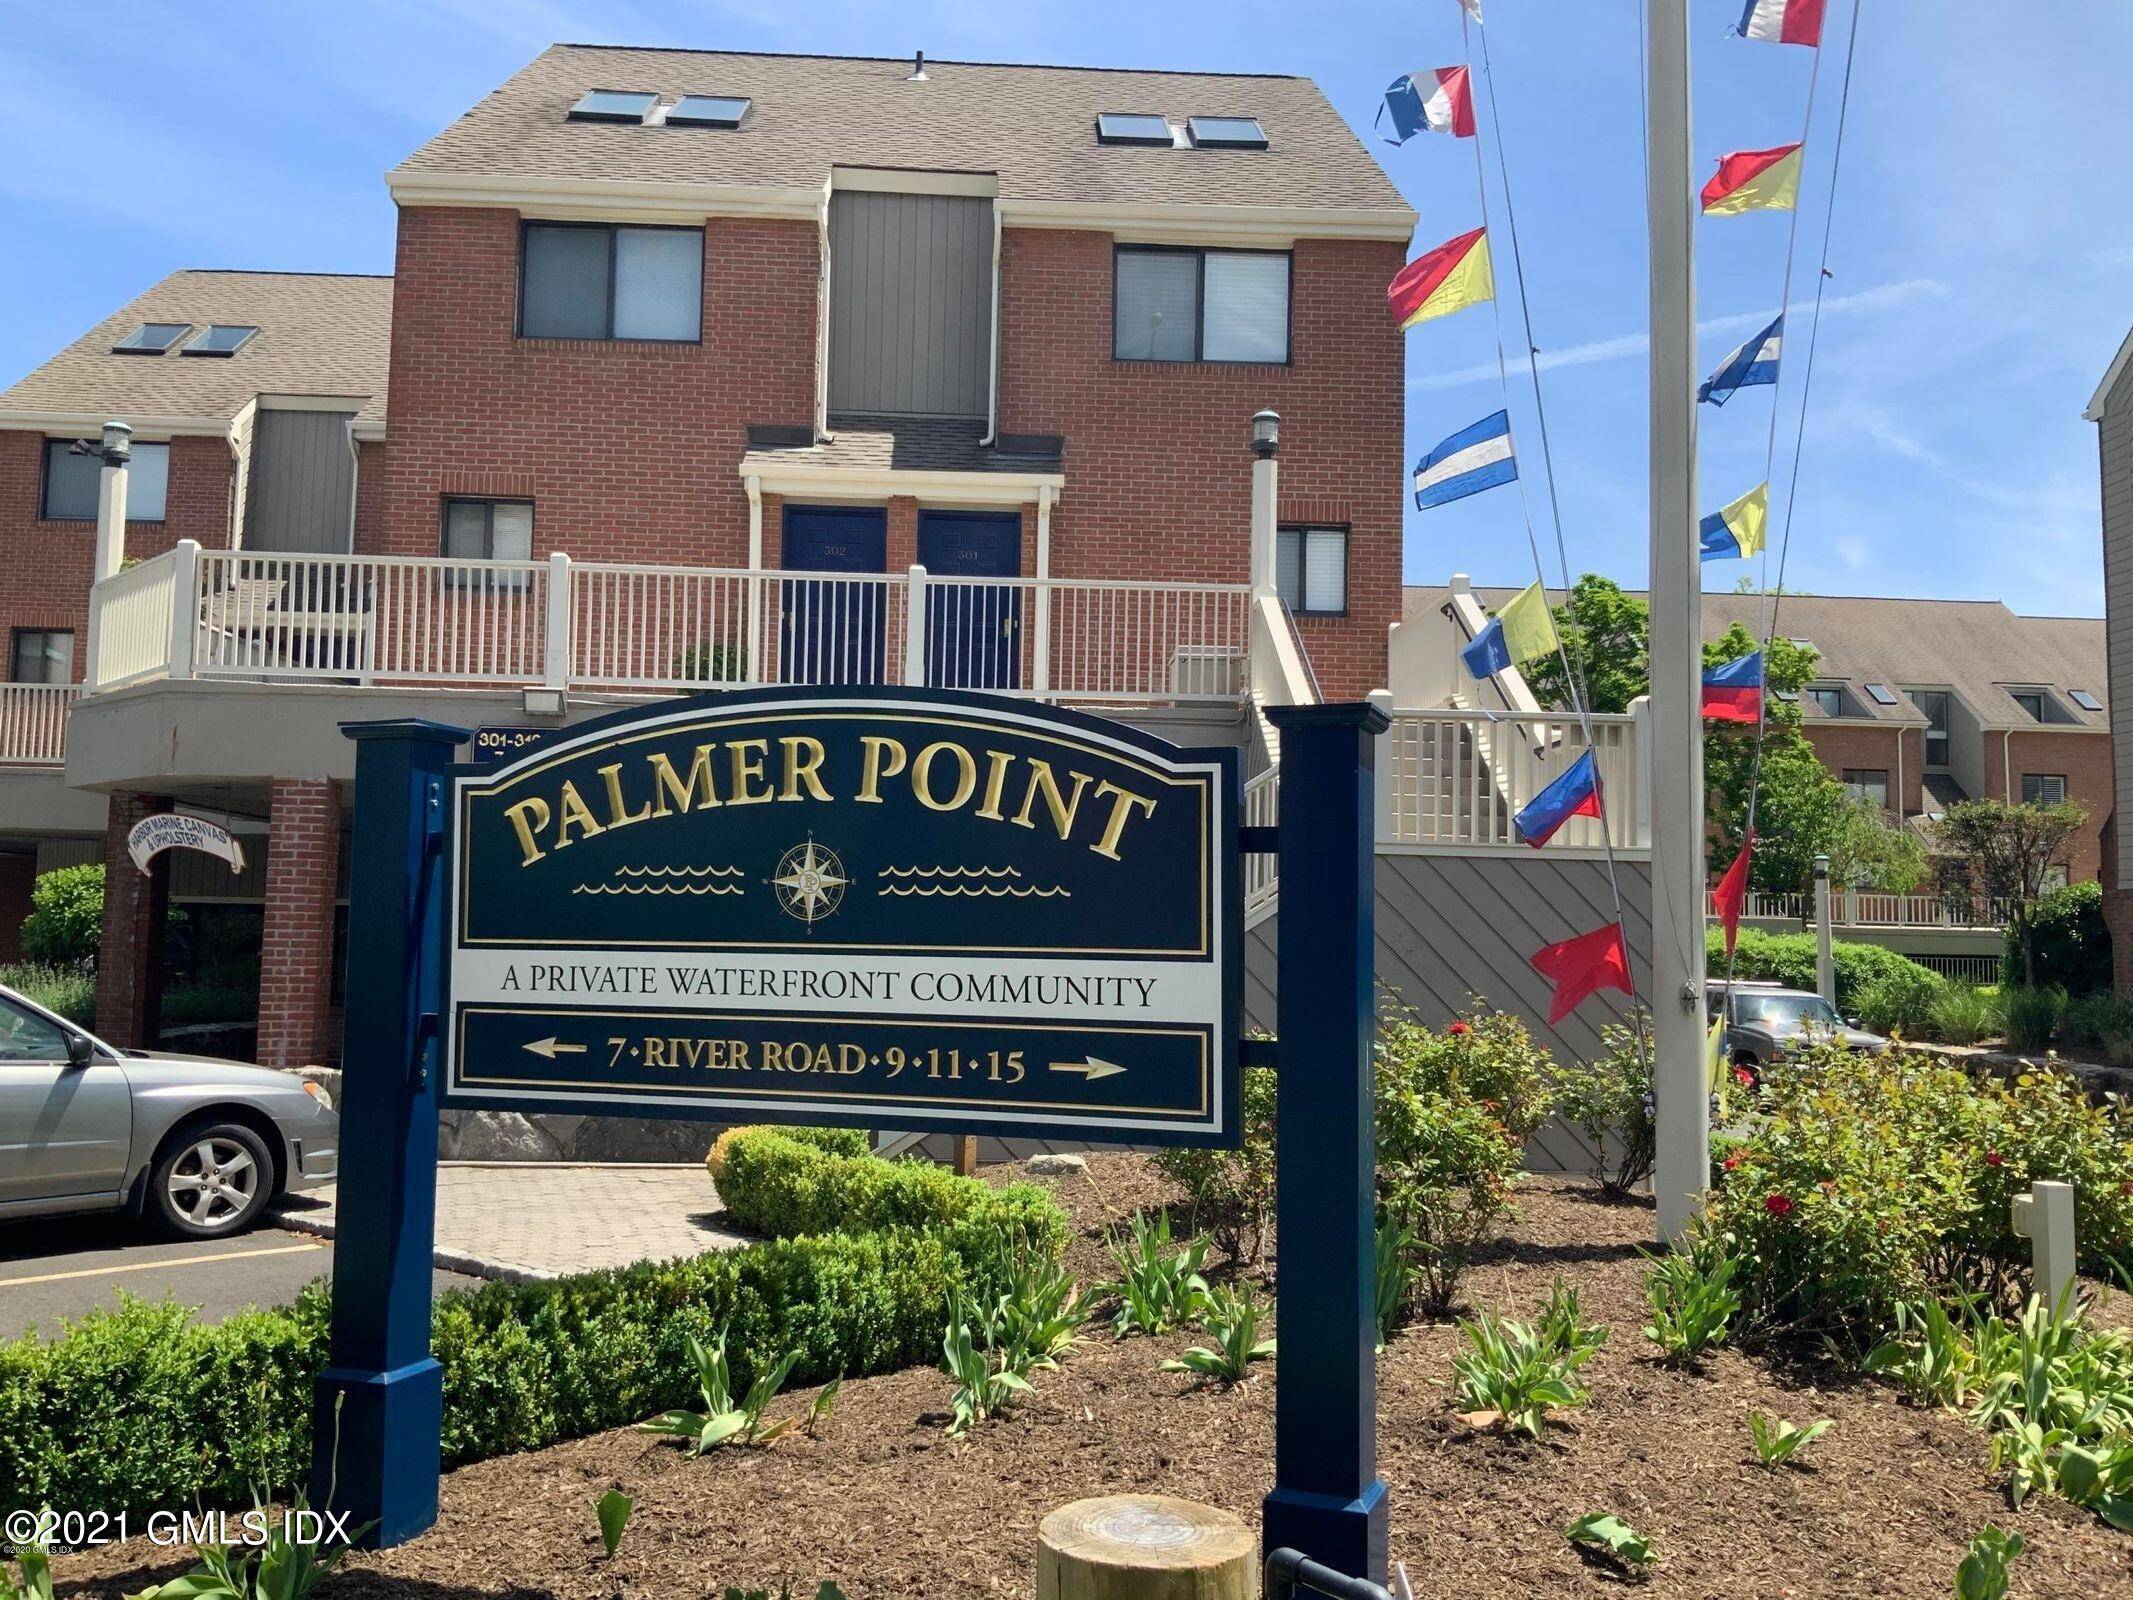 Two Bedroom Two Bath Waterfront condo with Marina minutes from Metro North Train Station 40 mins to Grand Central, Racquet Club, Greenwich Water Club, and bustling downtown Cos Cob.